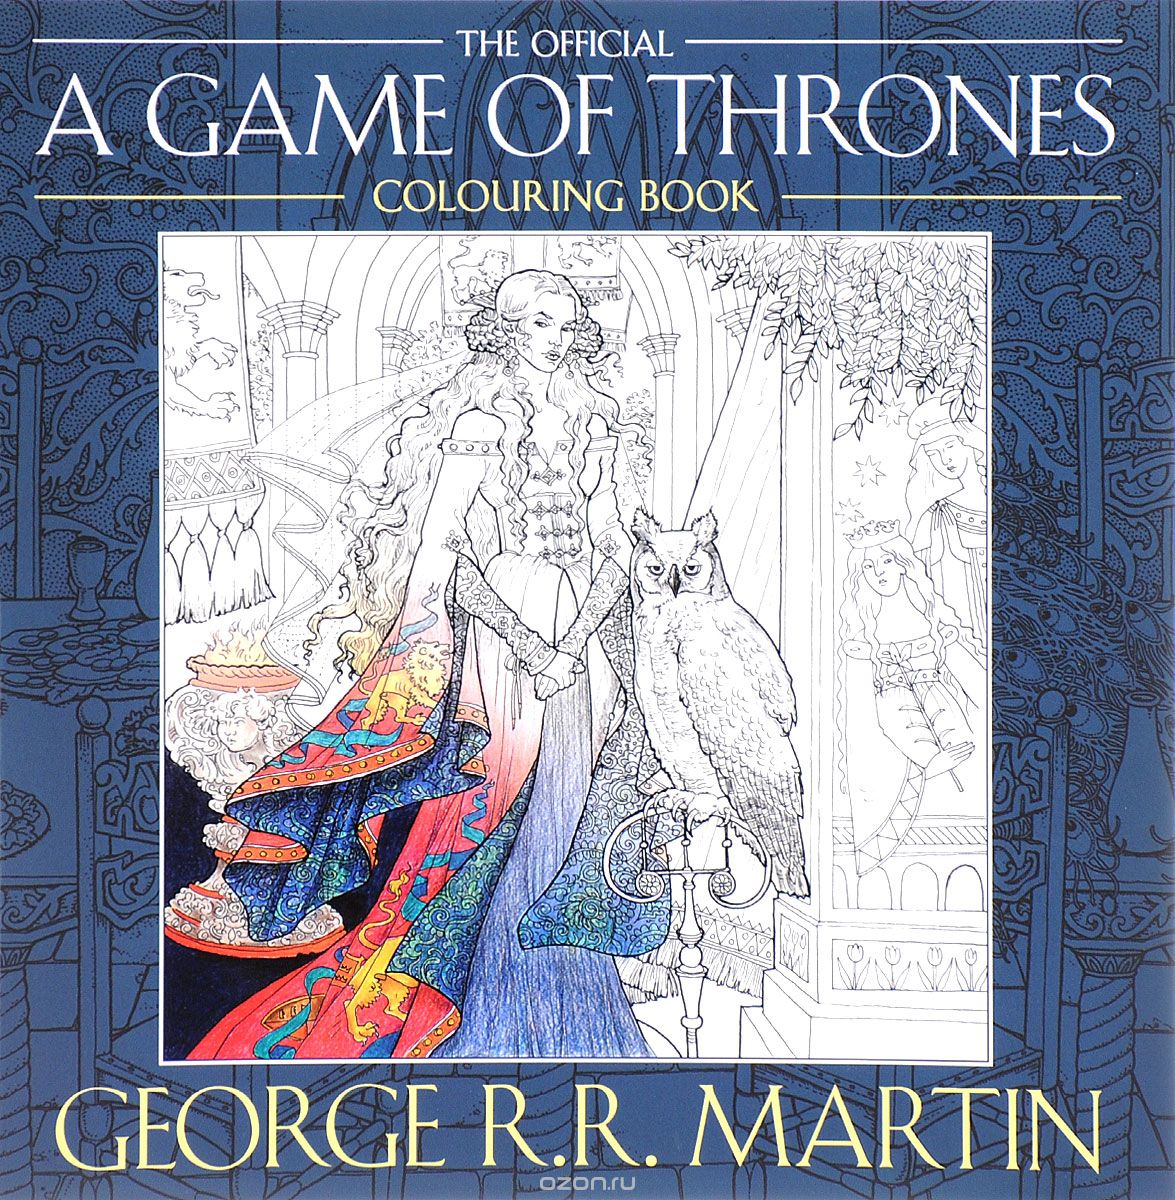 Скачать книгу "The Official A Game of Thrones: Colouring Book"